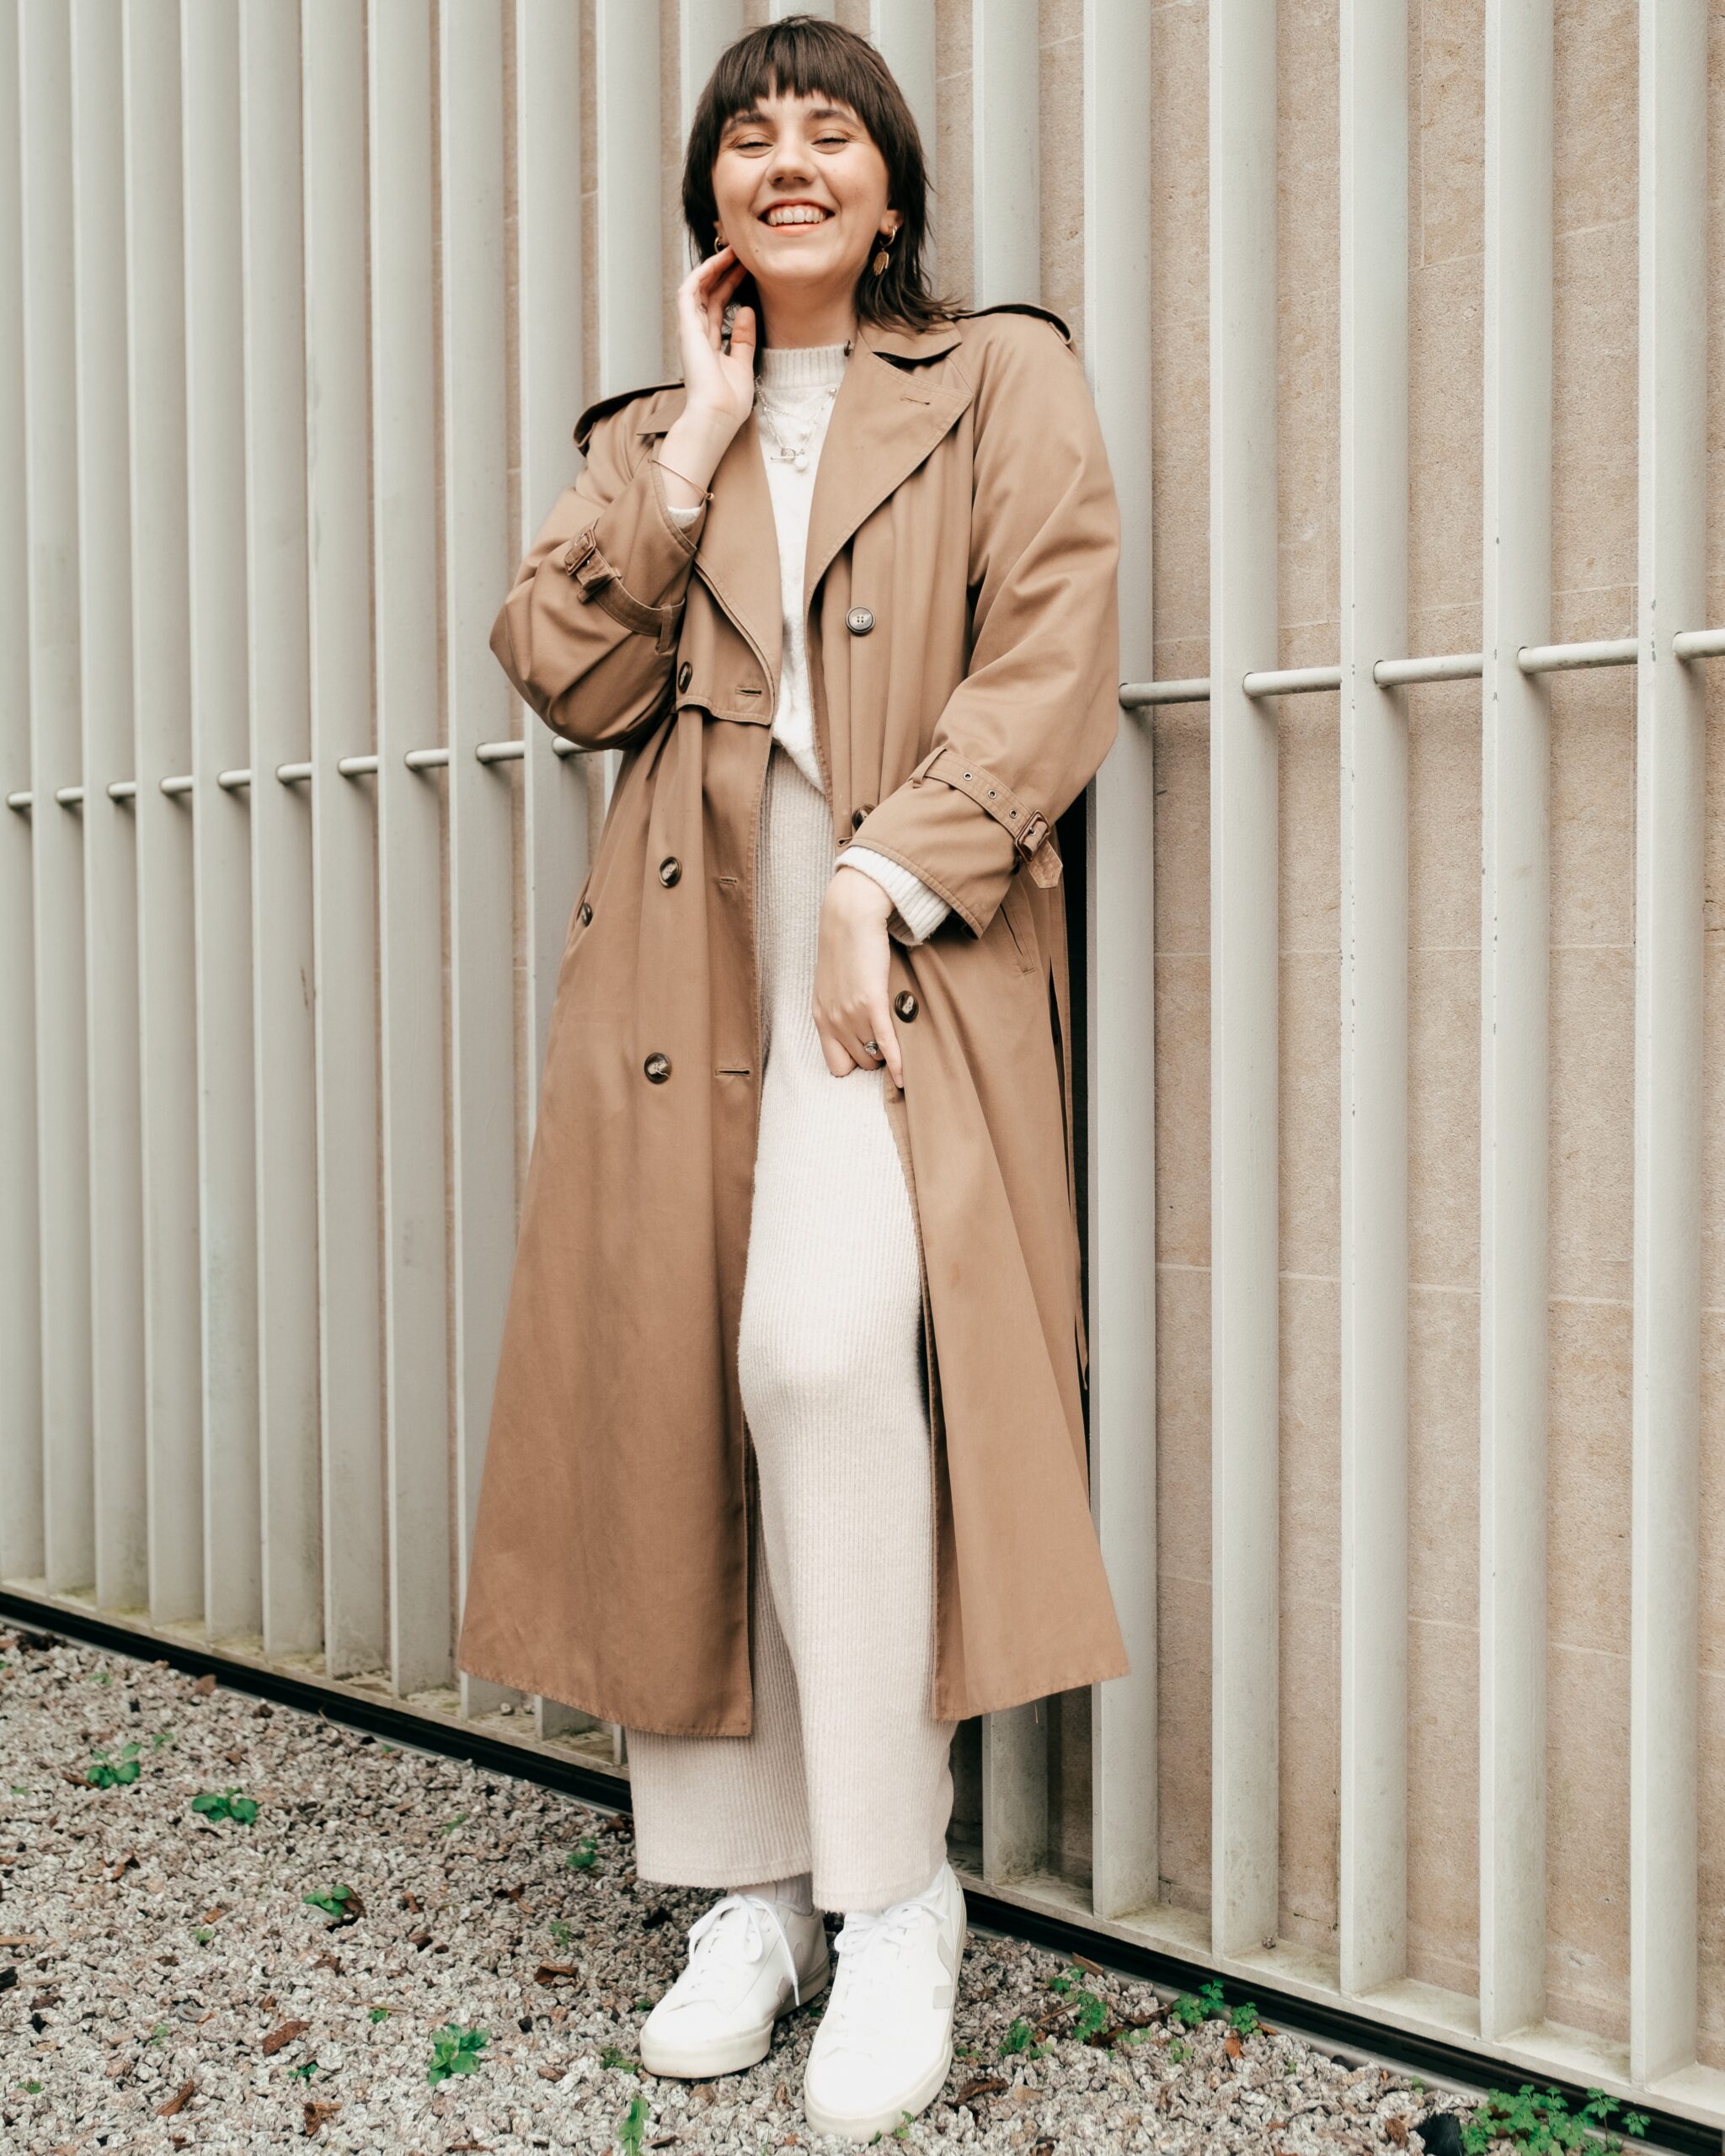 Woman in a trenchcoat